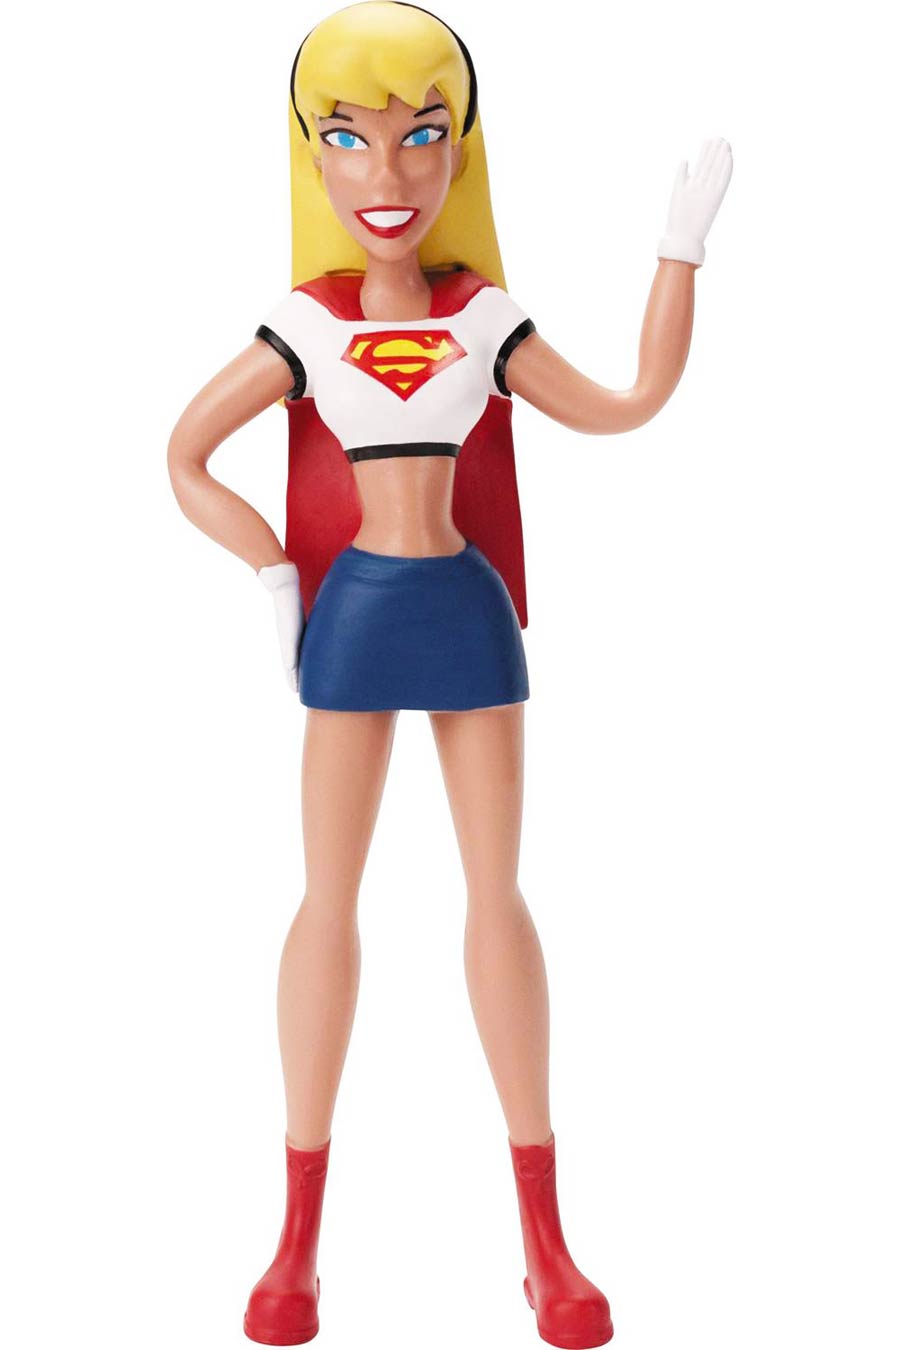 DC Comics 5-Inch Bendable Figure Superman The Animated Series Supergirl